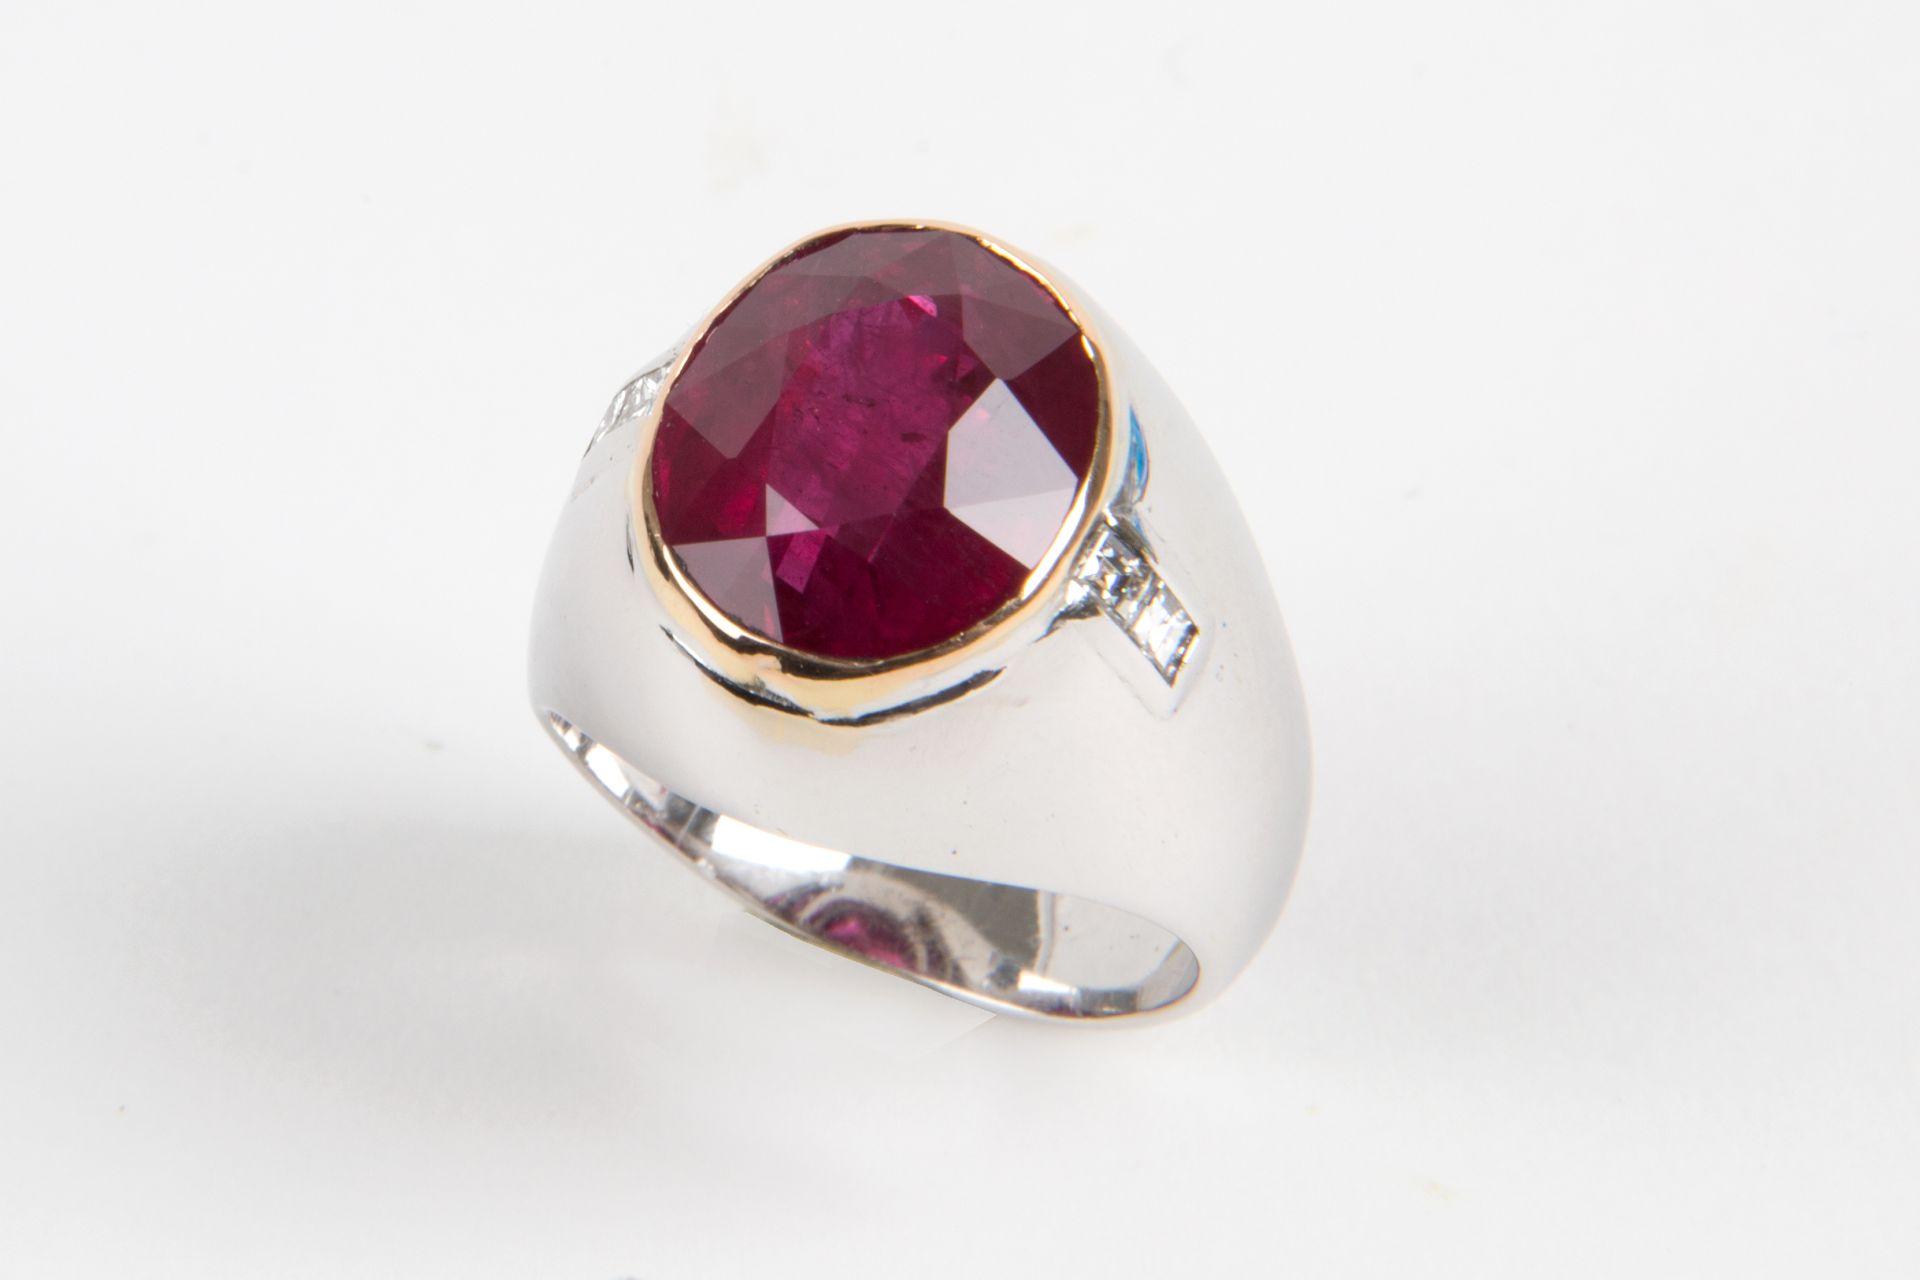 Diamond and ruby ring